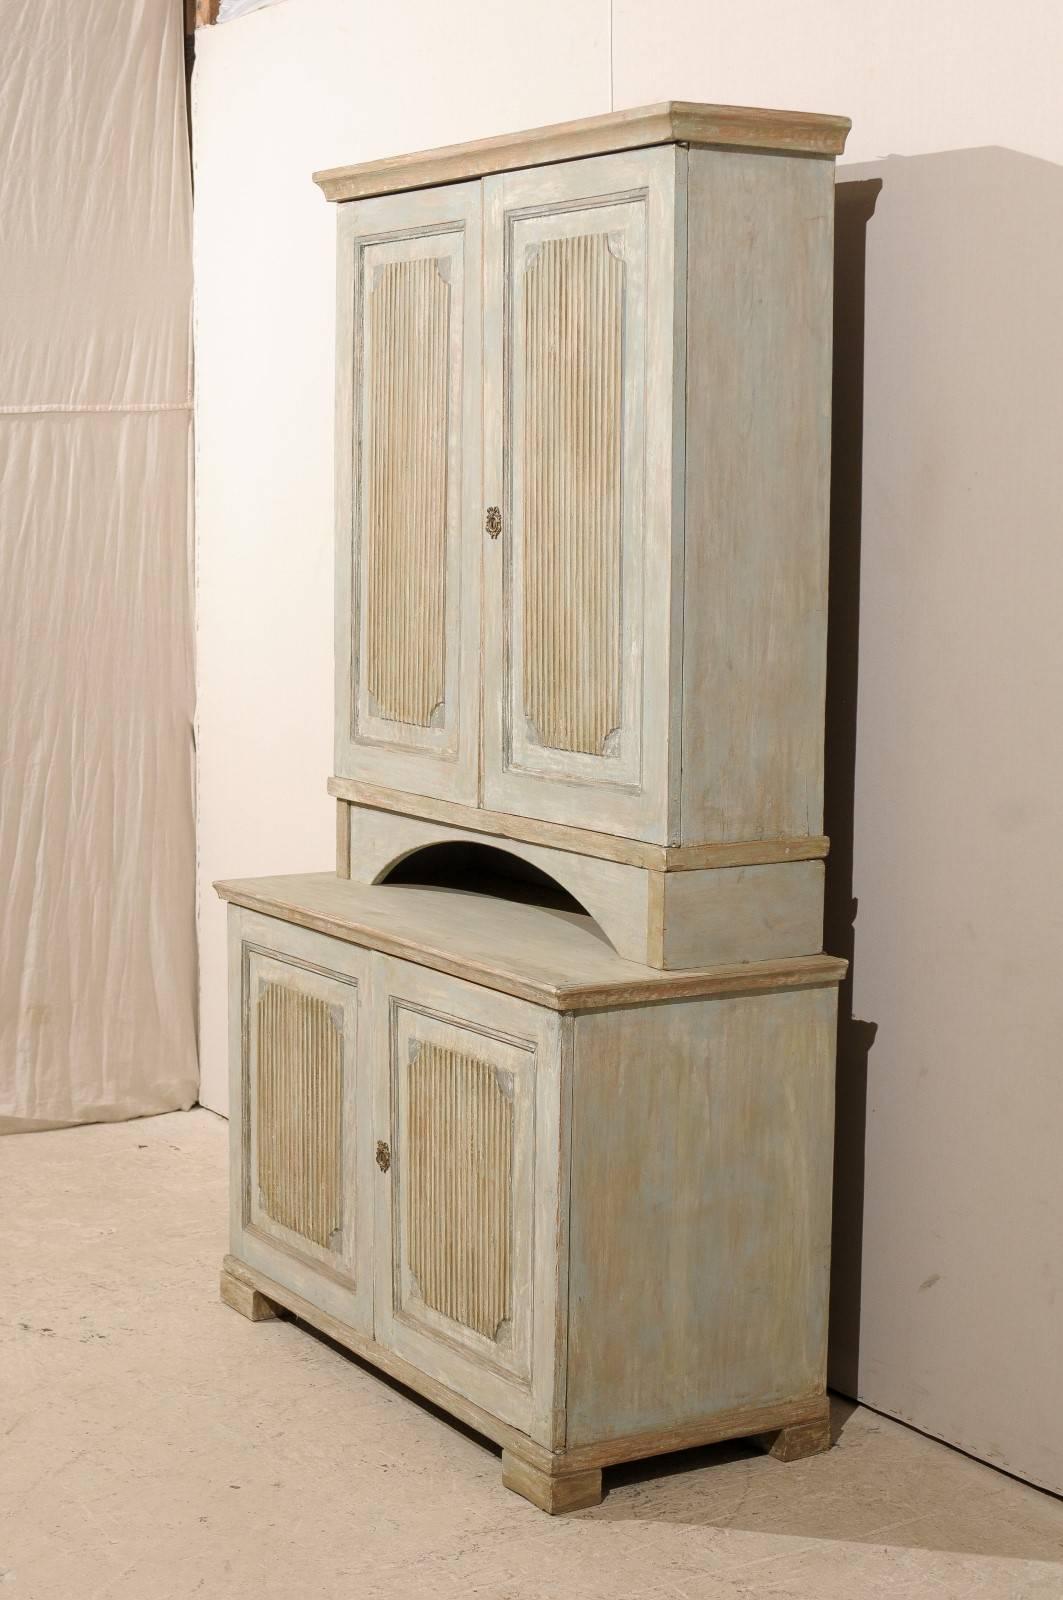 Wood Period Gustavian Swedish Cabinet from 19th Century with Many Interior Shelves